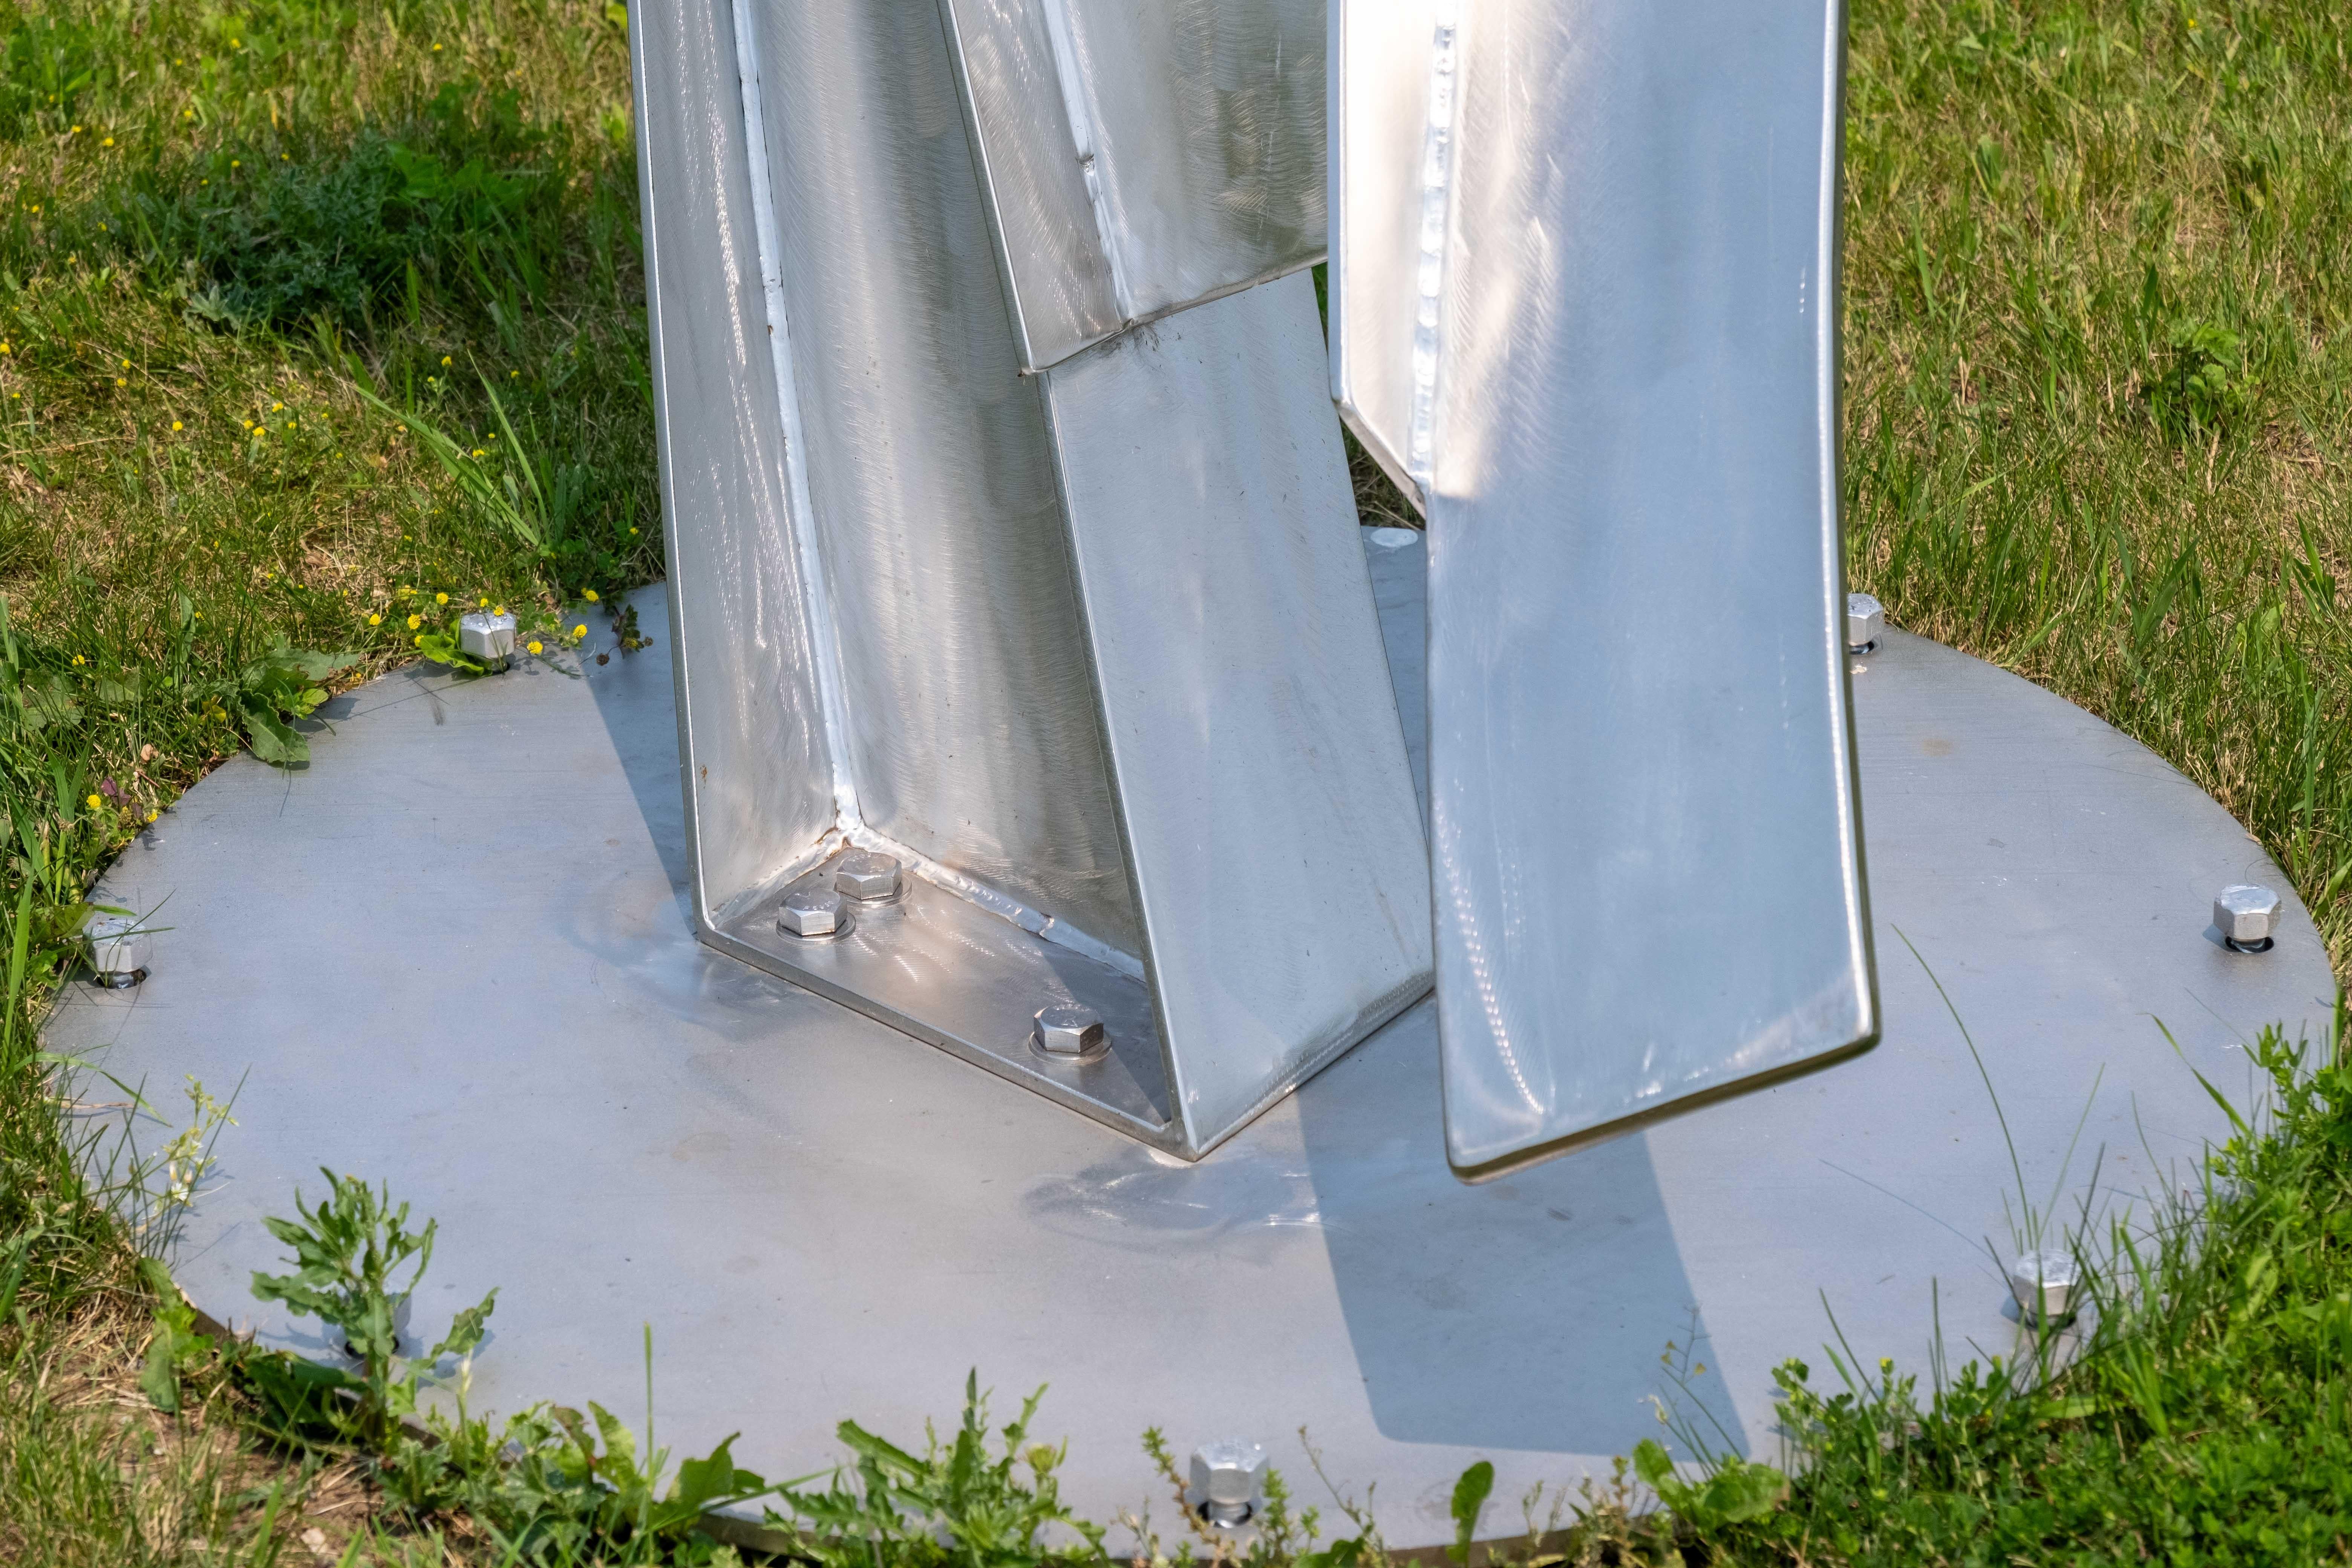 Corpheum XIX - large, geometric, abstract, stainless steel outdoor sculpture For Sale 4